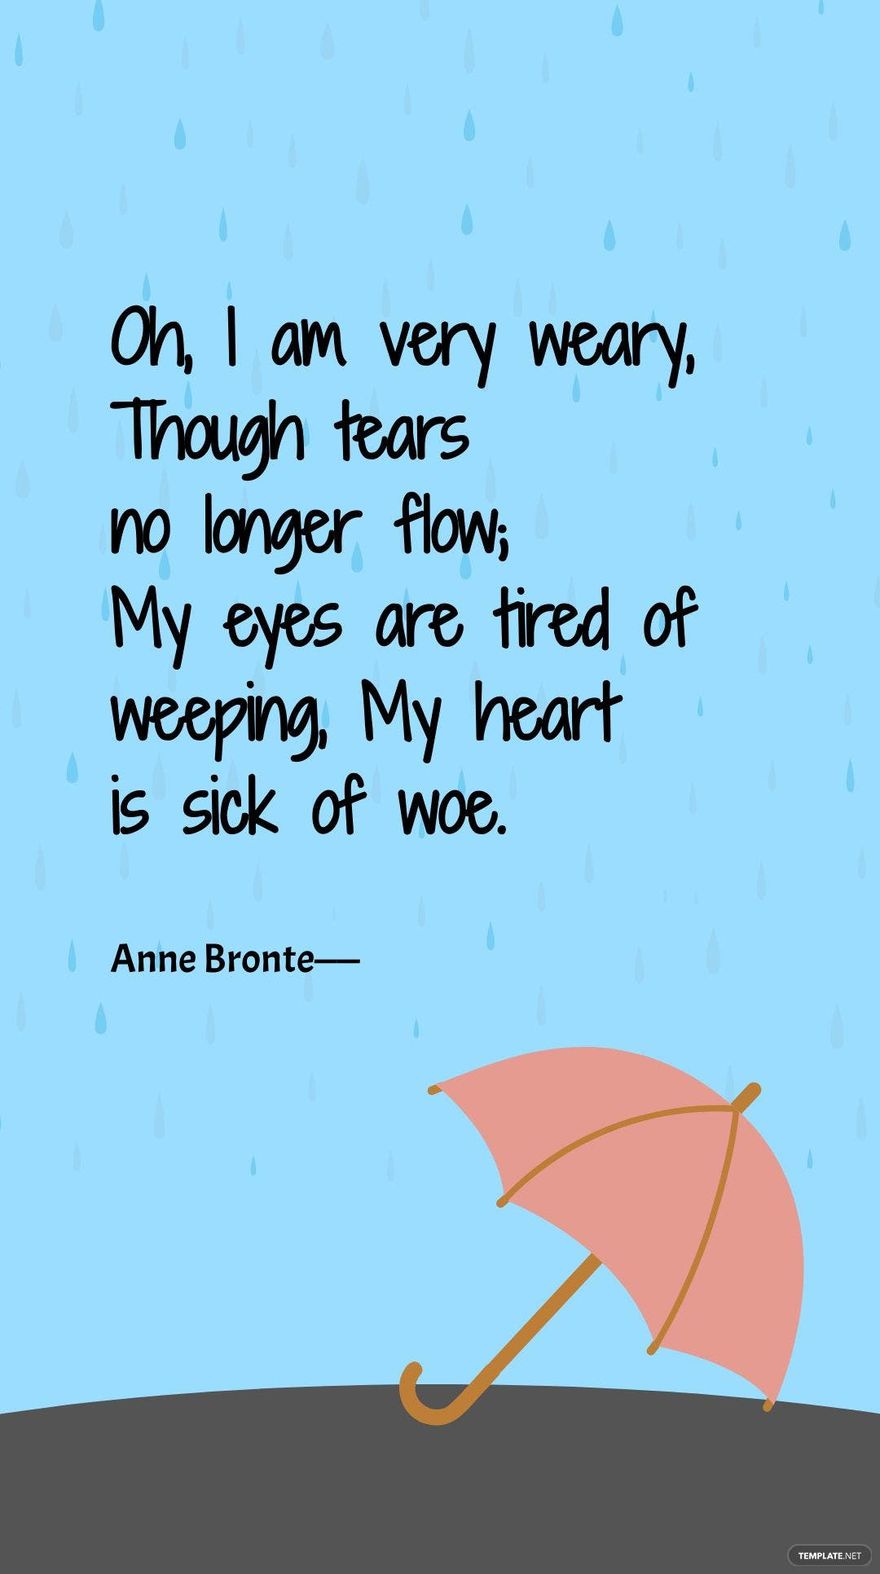 Anne Bronte - Oh, I am very weary, Though tears no longer flow; My eyes are tired of weeping, My heart is sick of woe.